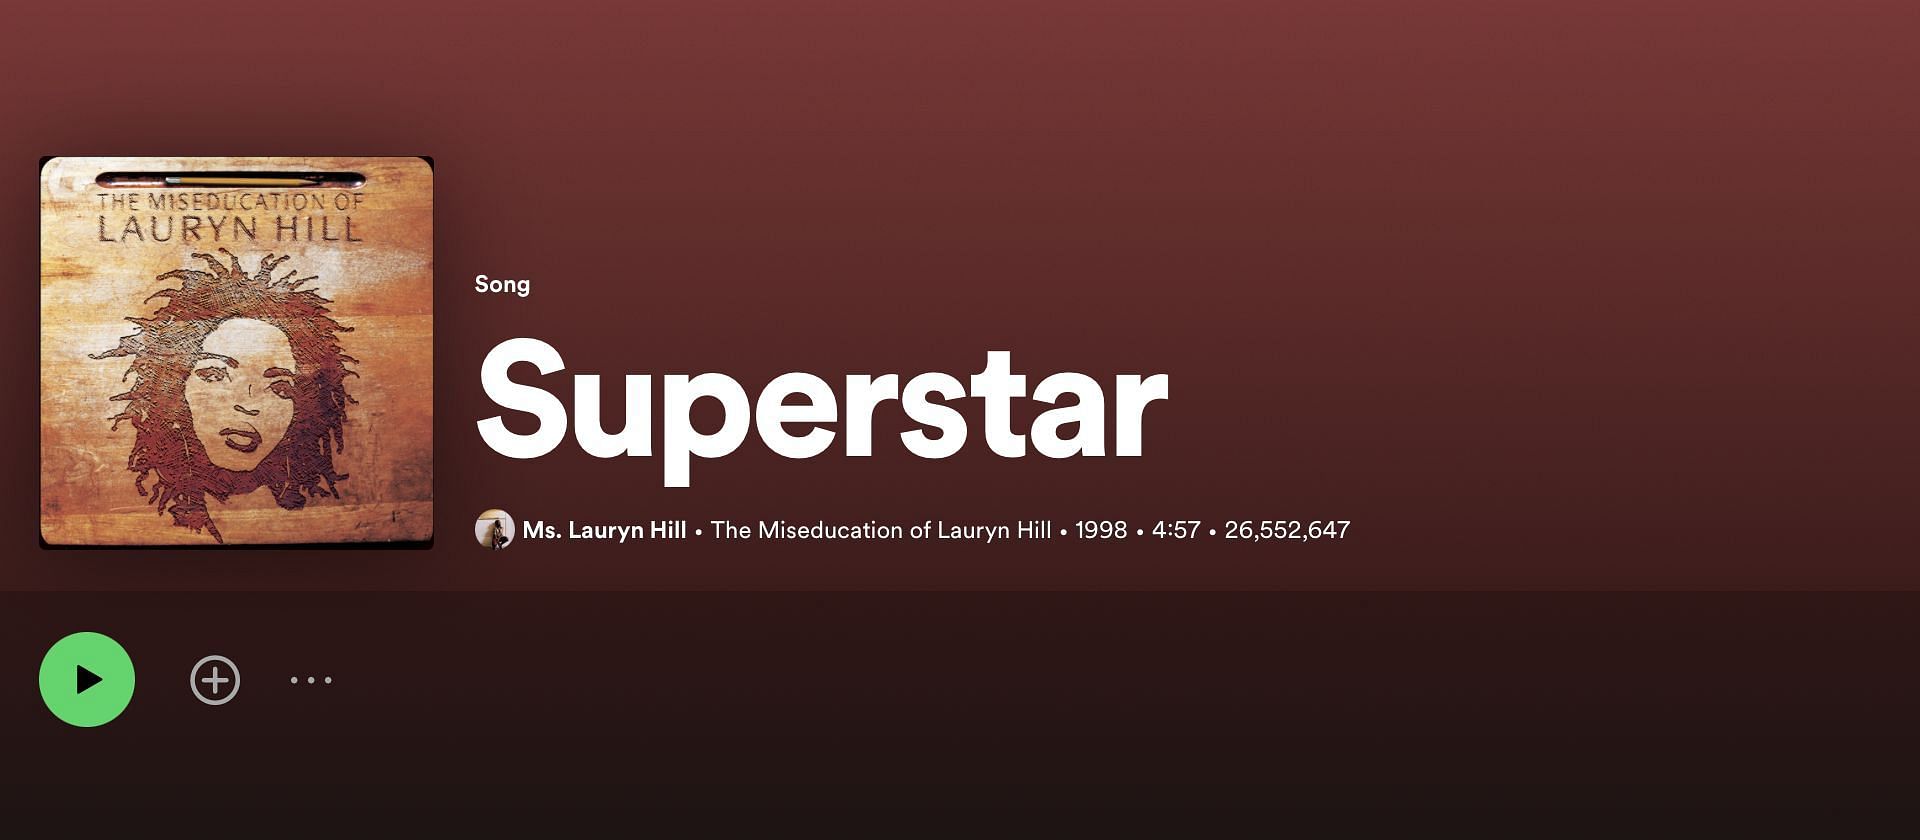 Track 6 of Lauryn&#039;s debut album &#039;The Miseducation of Lauryn Hill&#039; (Image via Spotify)